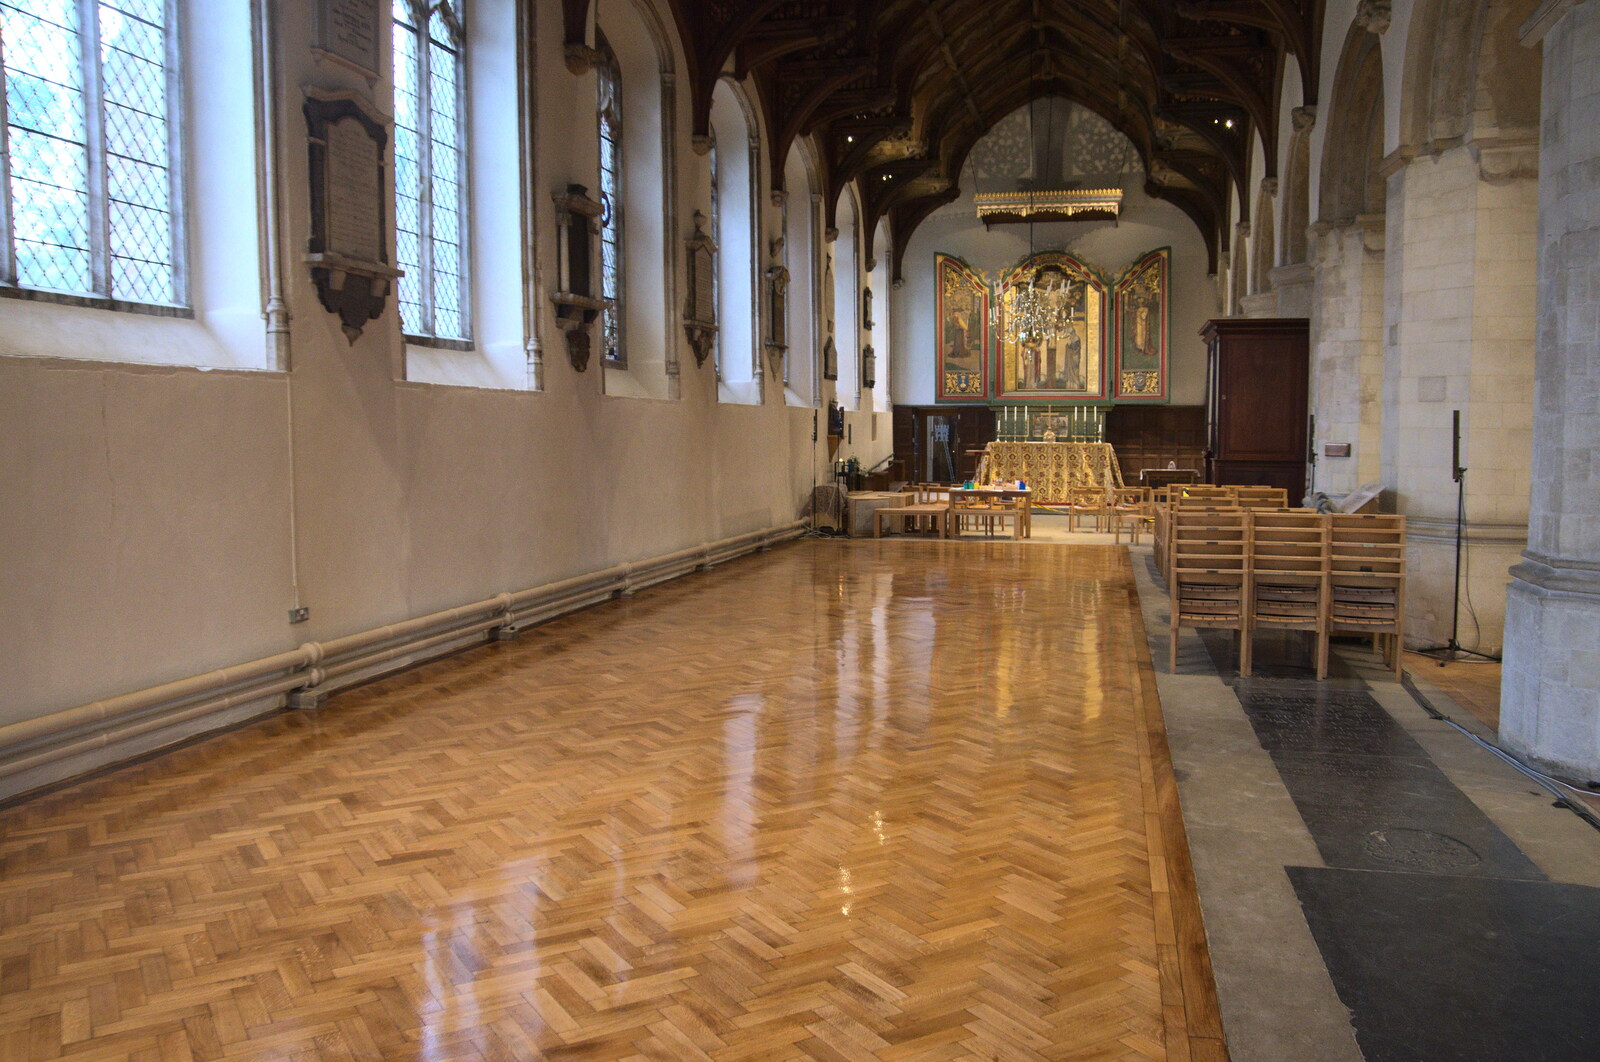 The herringbone floor has been re-varnished from A Postcard from Wymondham, Norfolk - 26th January 2023